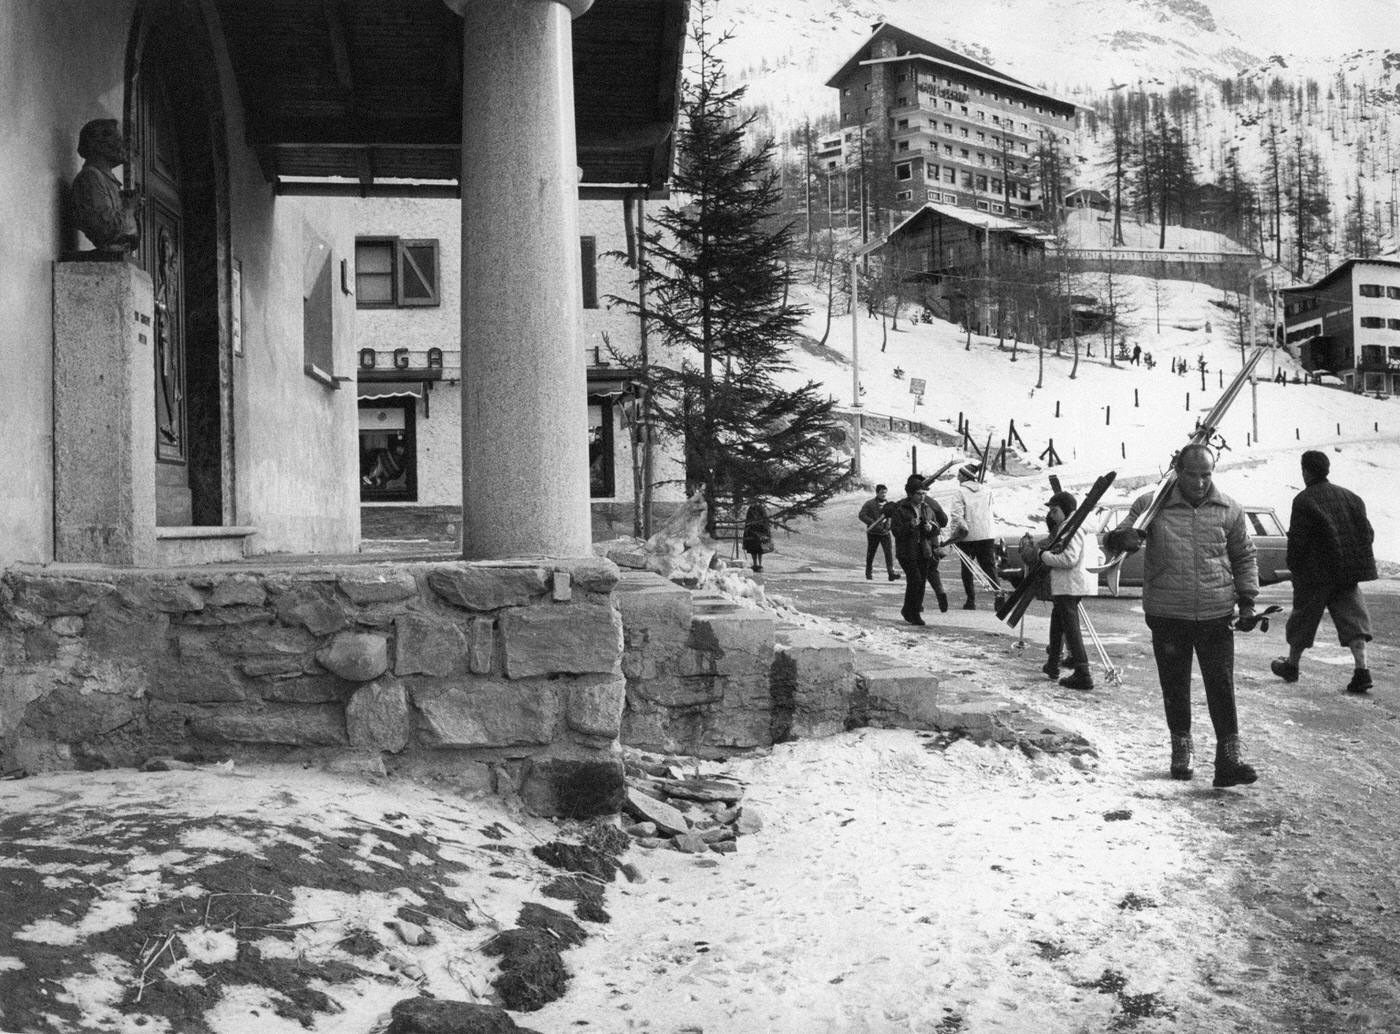 Some skiers, with the skis on their shoulders. walking in front of the new church founded by Don Giuseppe Vietto, the odd priest of Cervino. Valtournenche, 1964